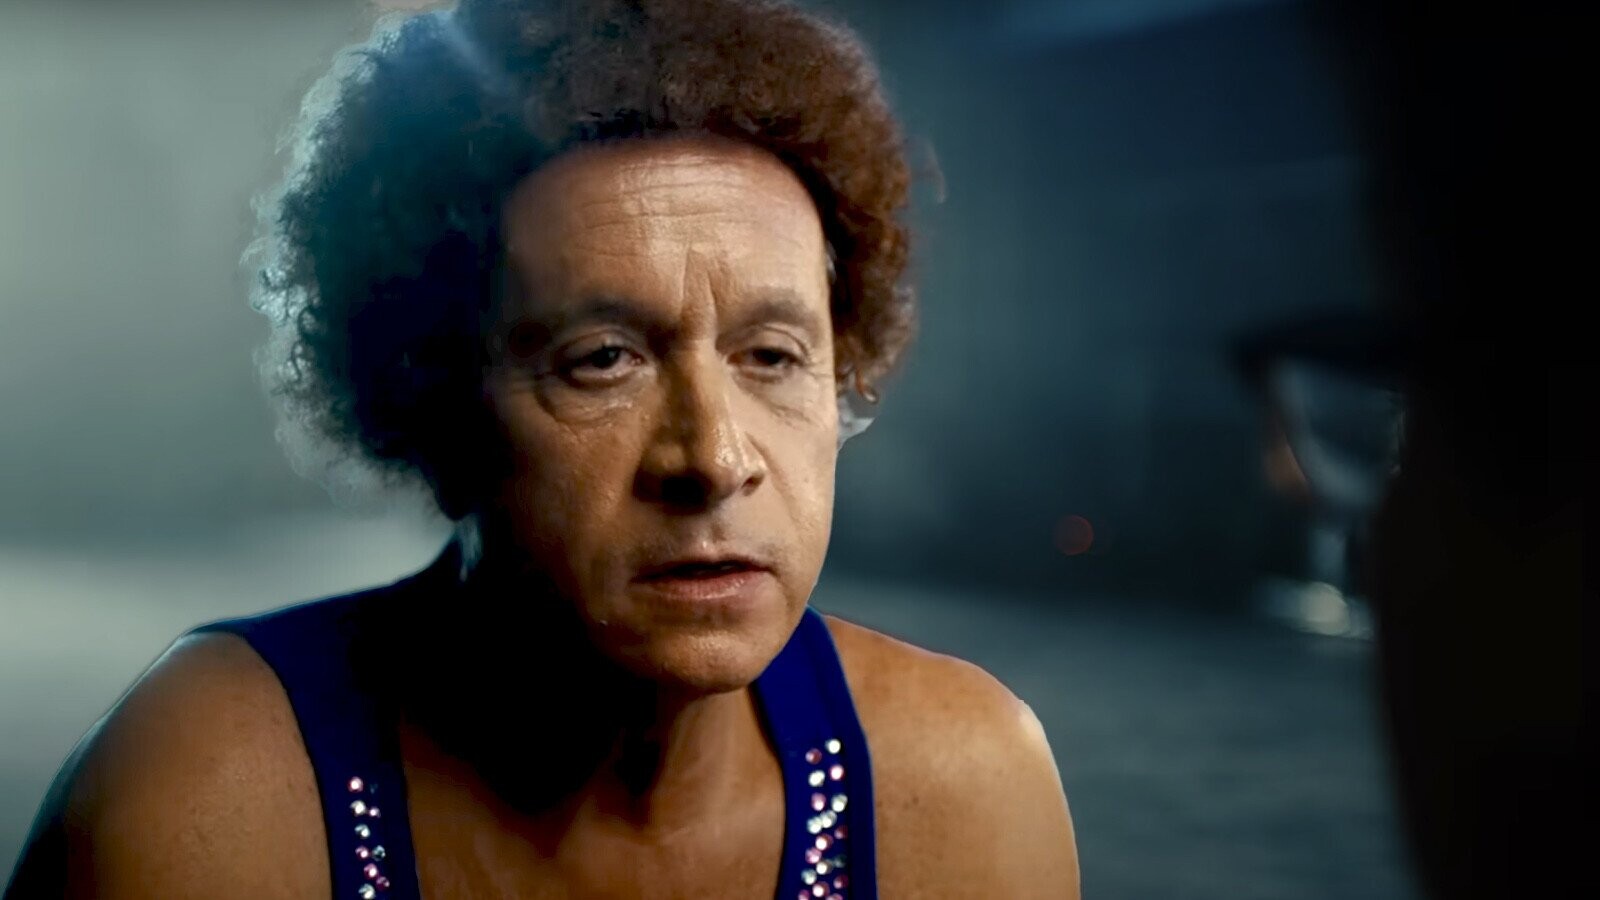 Pauly Shore as Richard Simmons Might Just Win Him A ‘F***ing Oscar ...